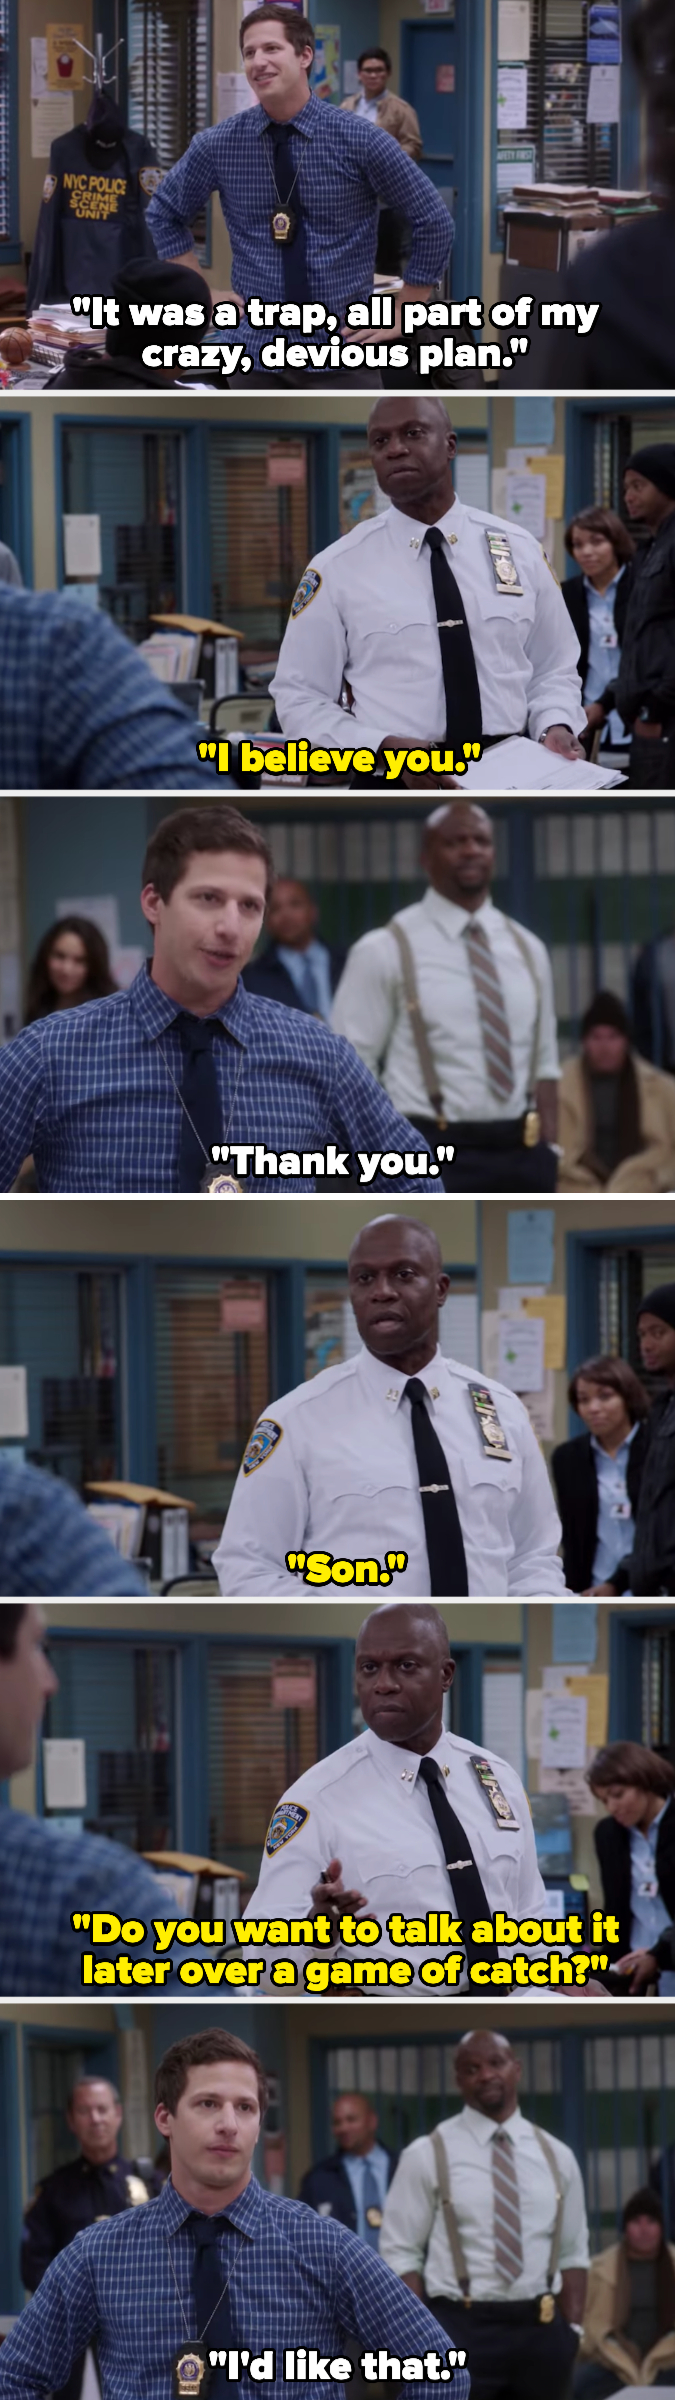 Holt asks Jake if he wants to have a talk about the incident over a game of catch later